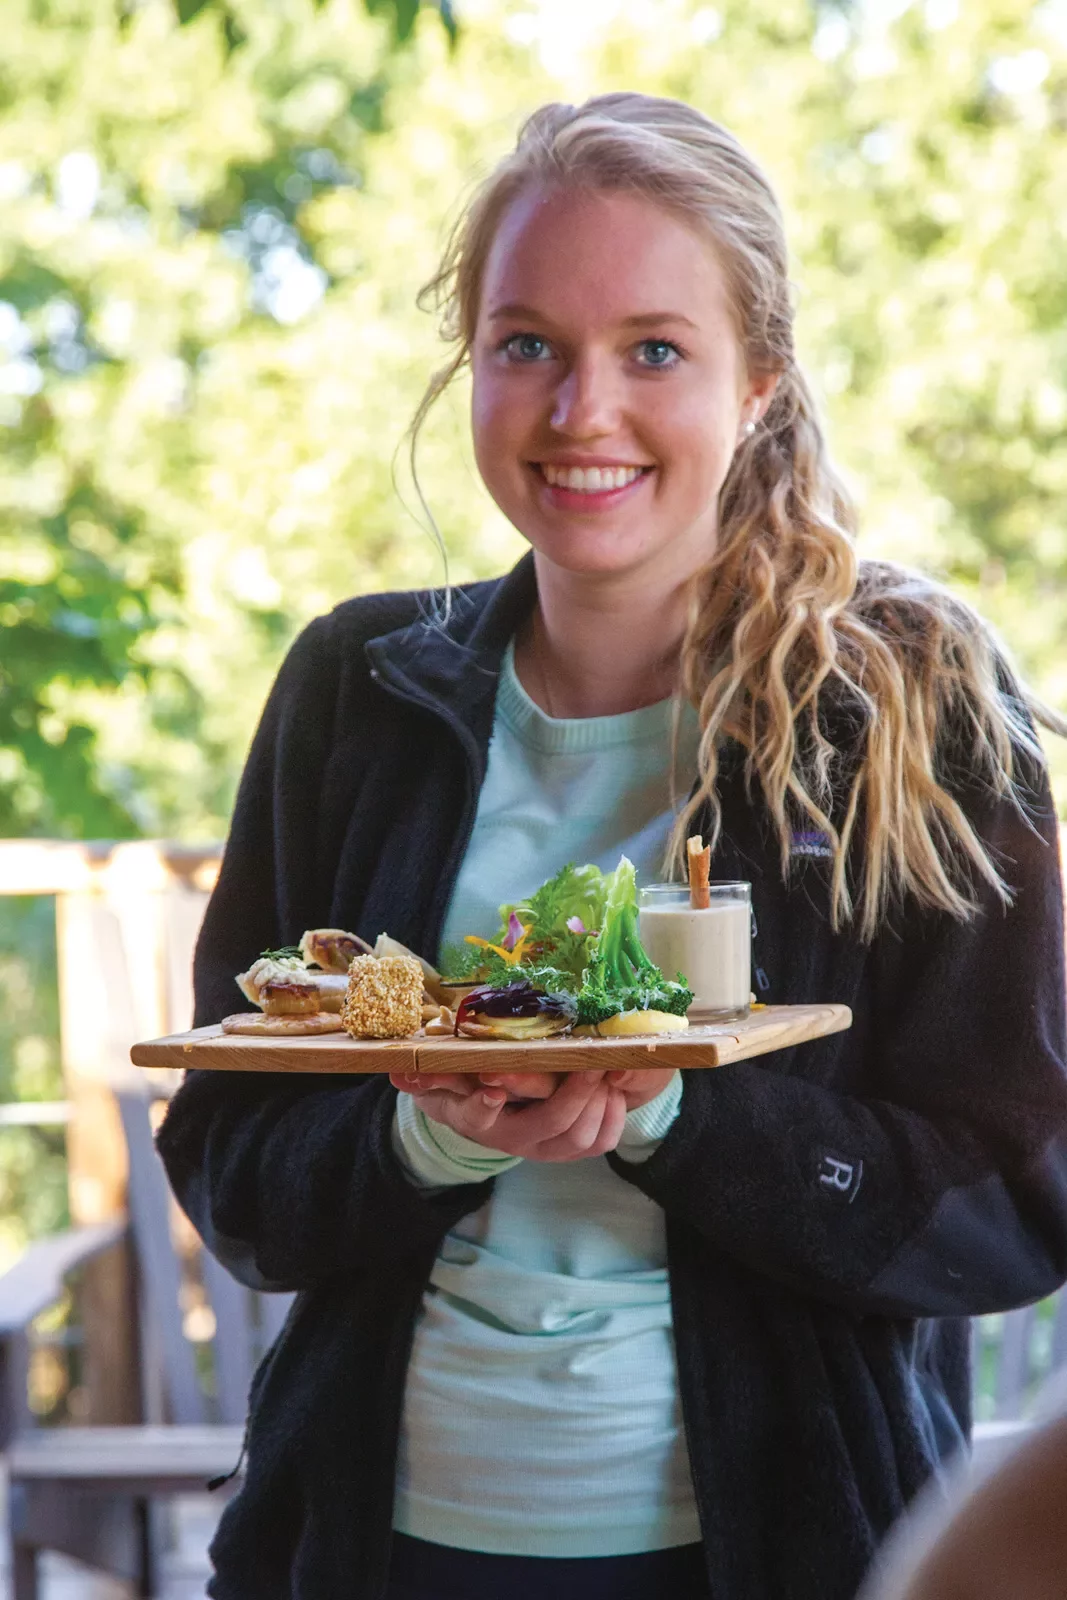 Woman holding plate of food